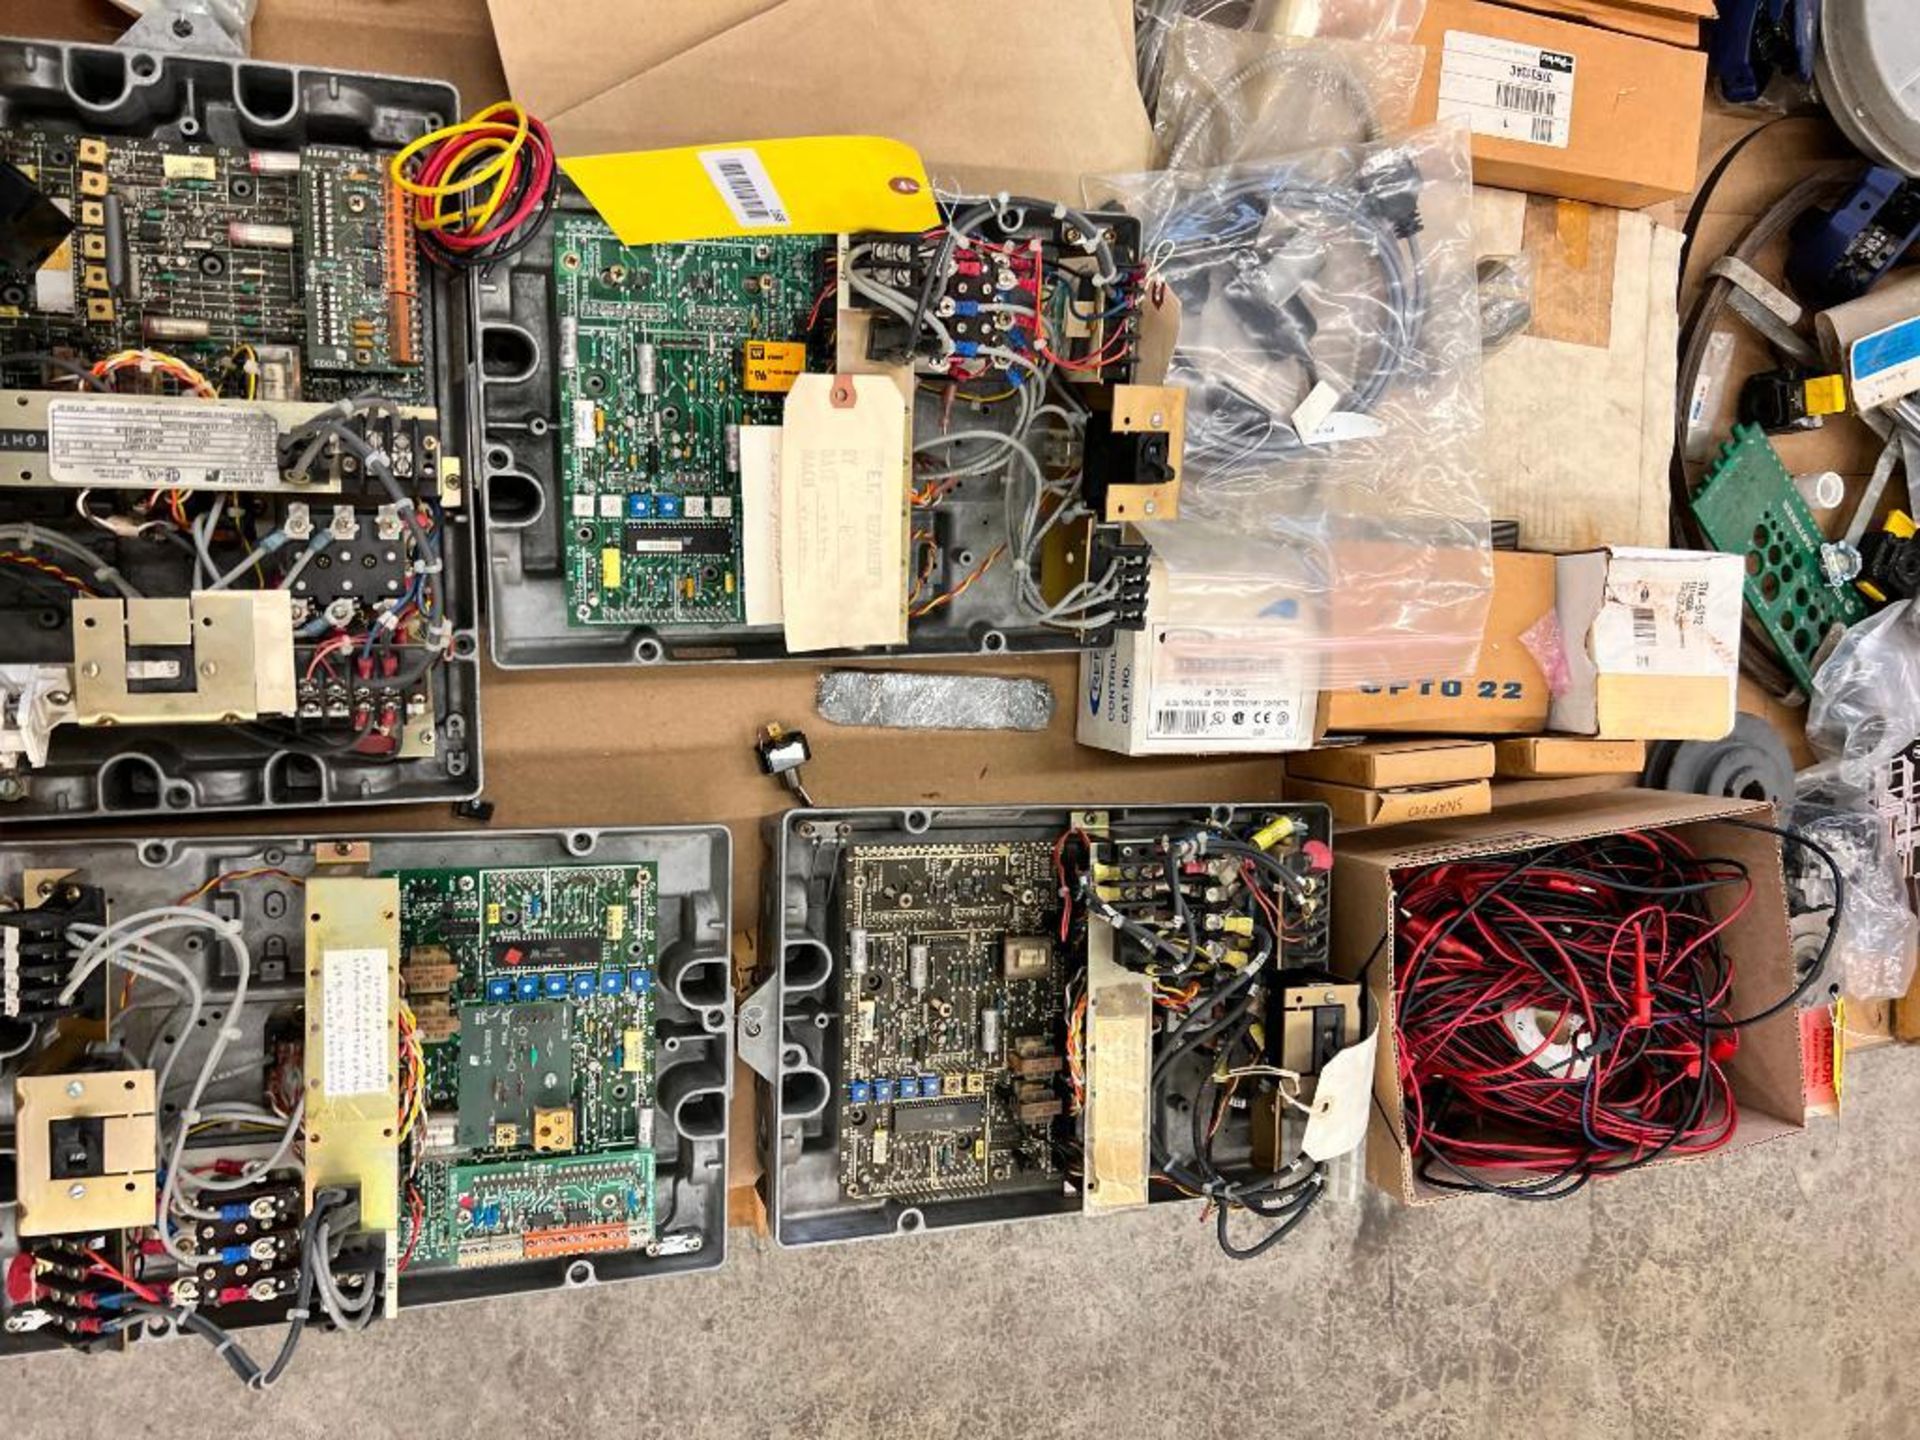 SKID OF ASSORTED MOTHER BOARDS, ELECTRICAL PLUGS, CONTROL SWITCHES, & OTHER ELECTRICAL COMPONENTS - Image 4 of 5